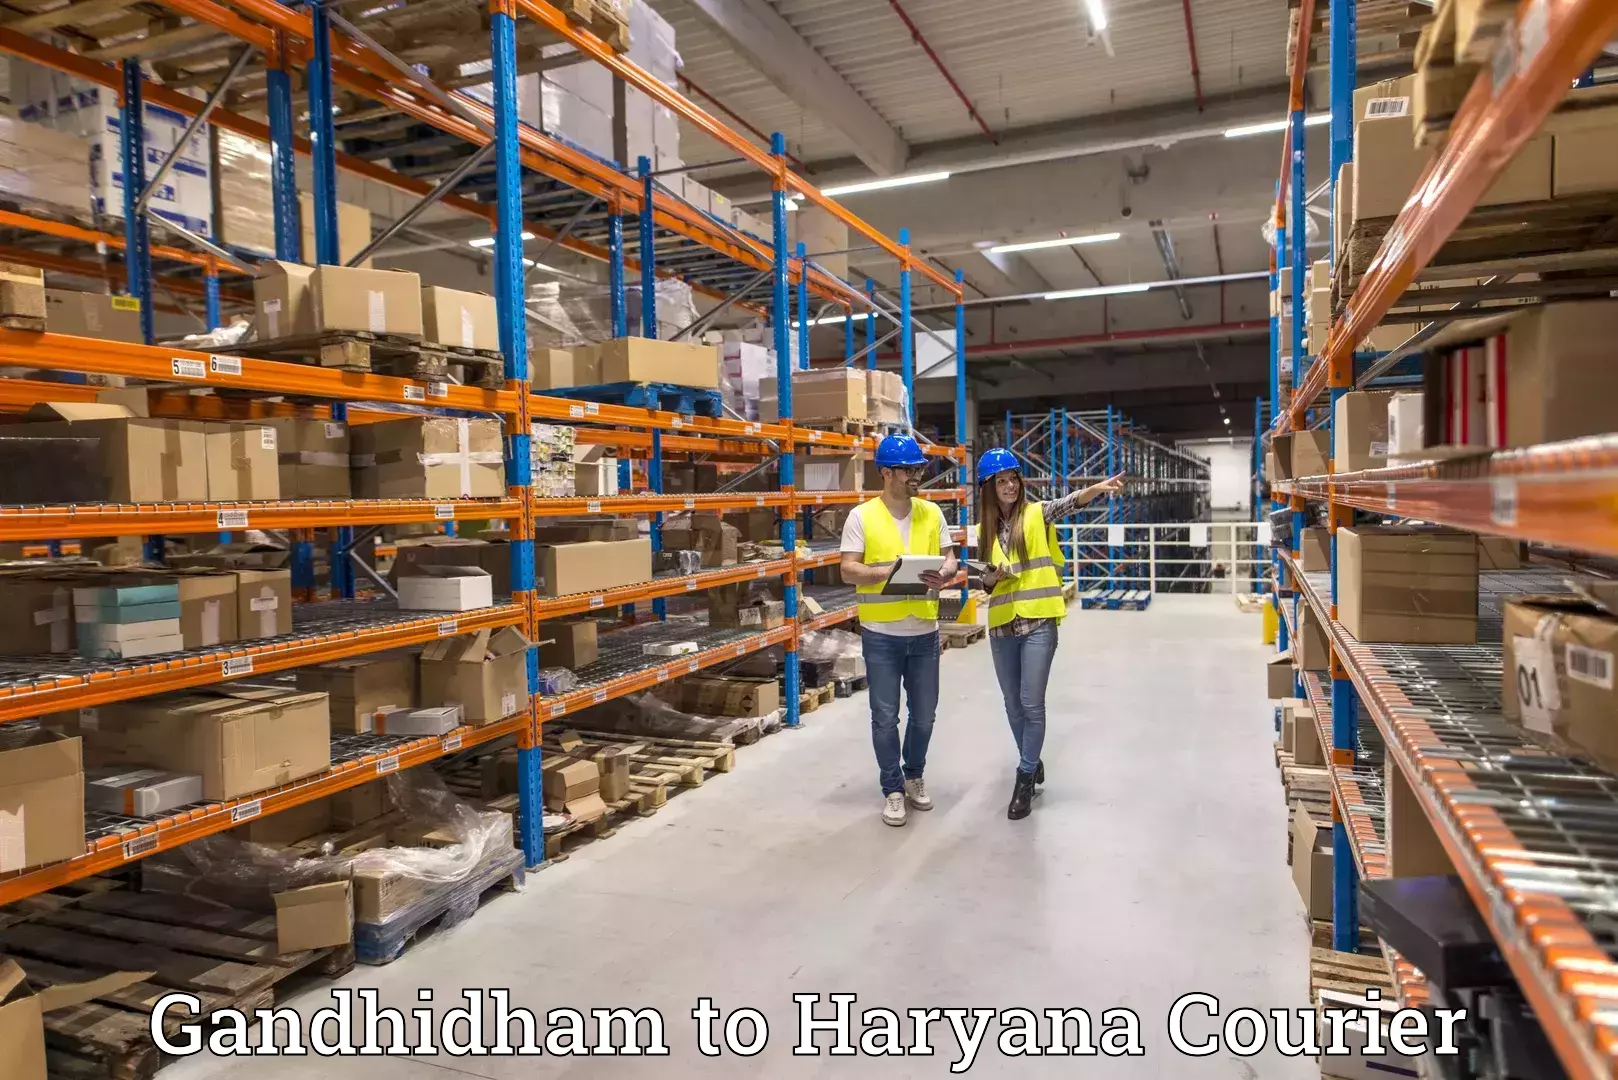 Express delivery capabilities Gandhidham to Ambala